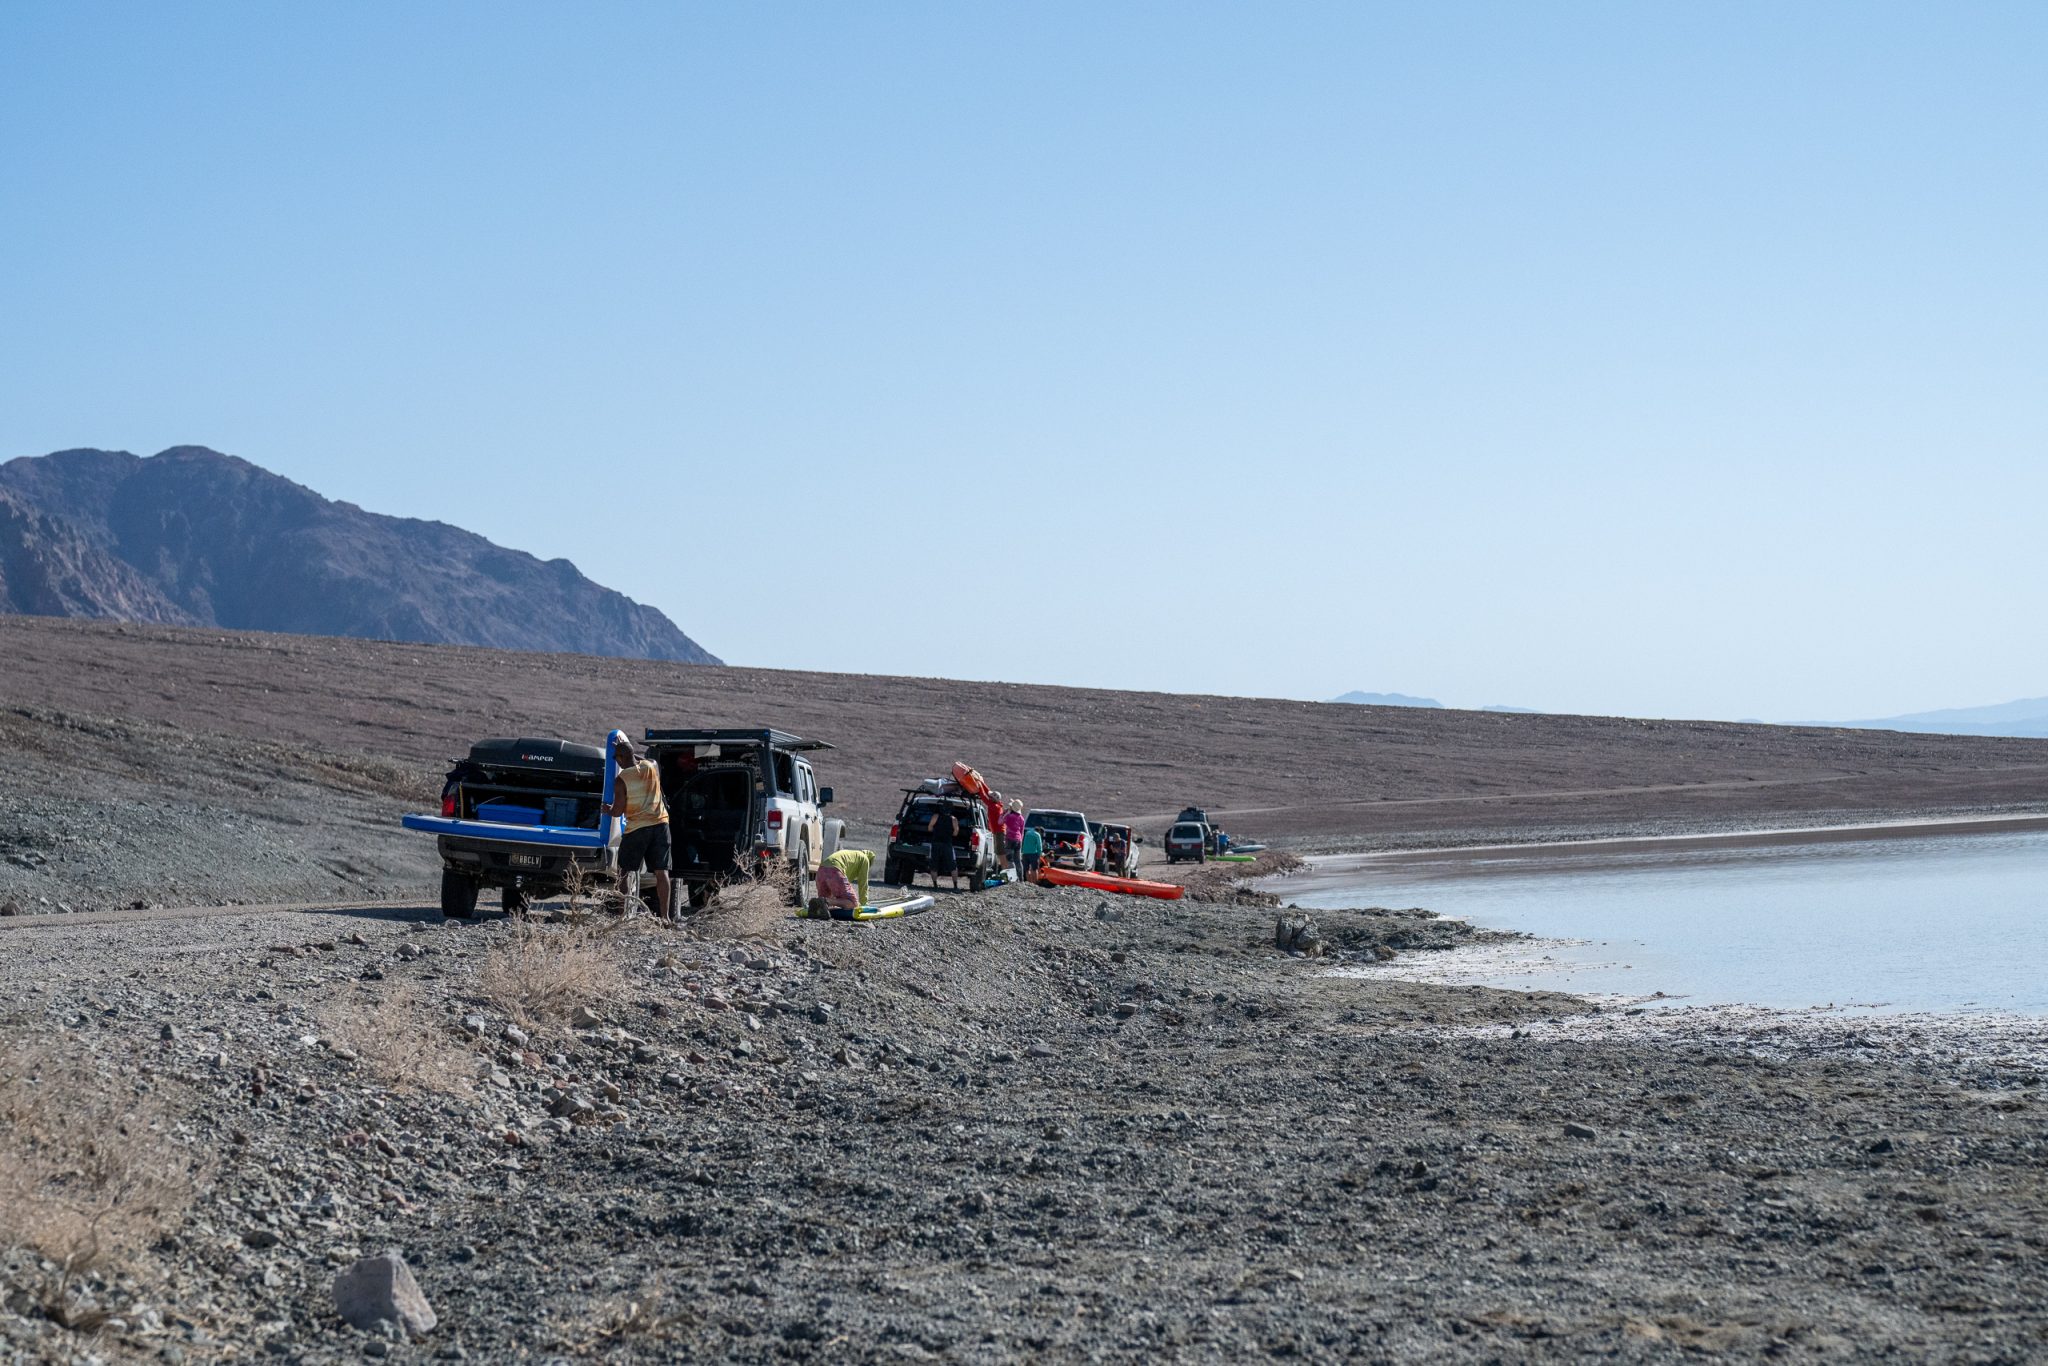 Kayaking death valley national park launch point parked cars